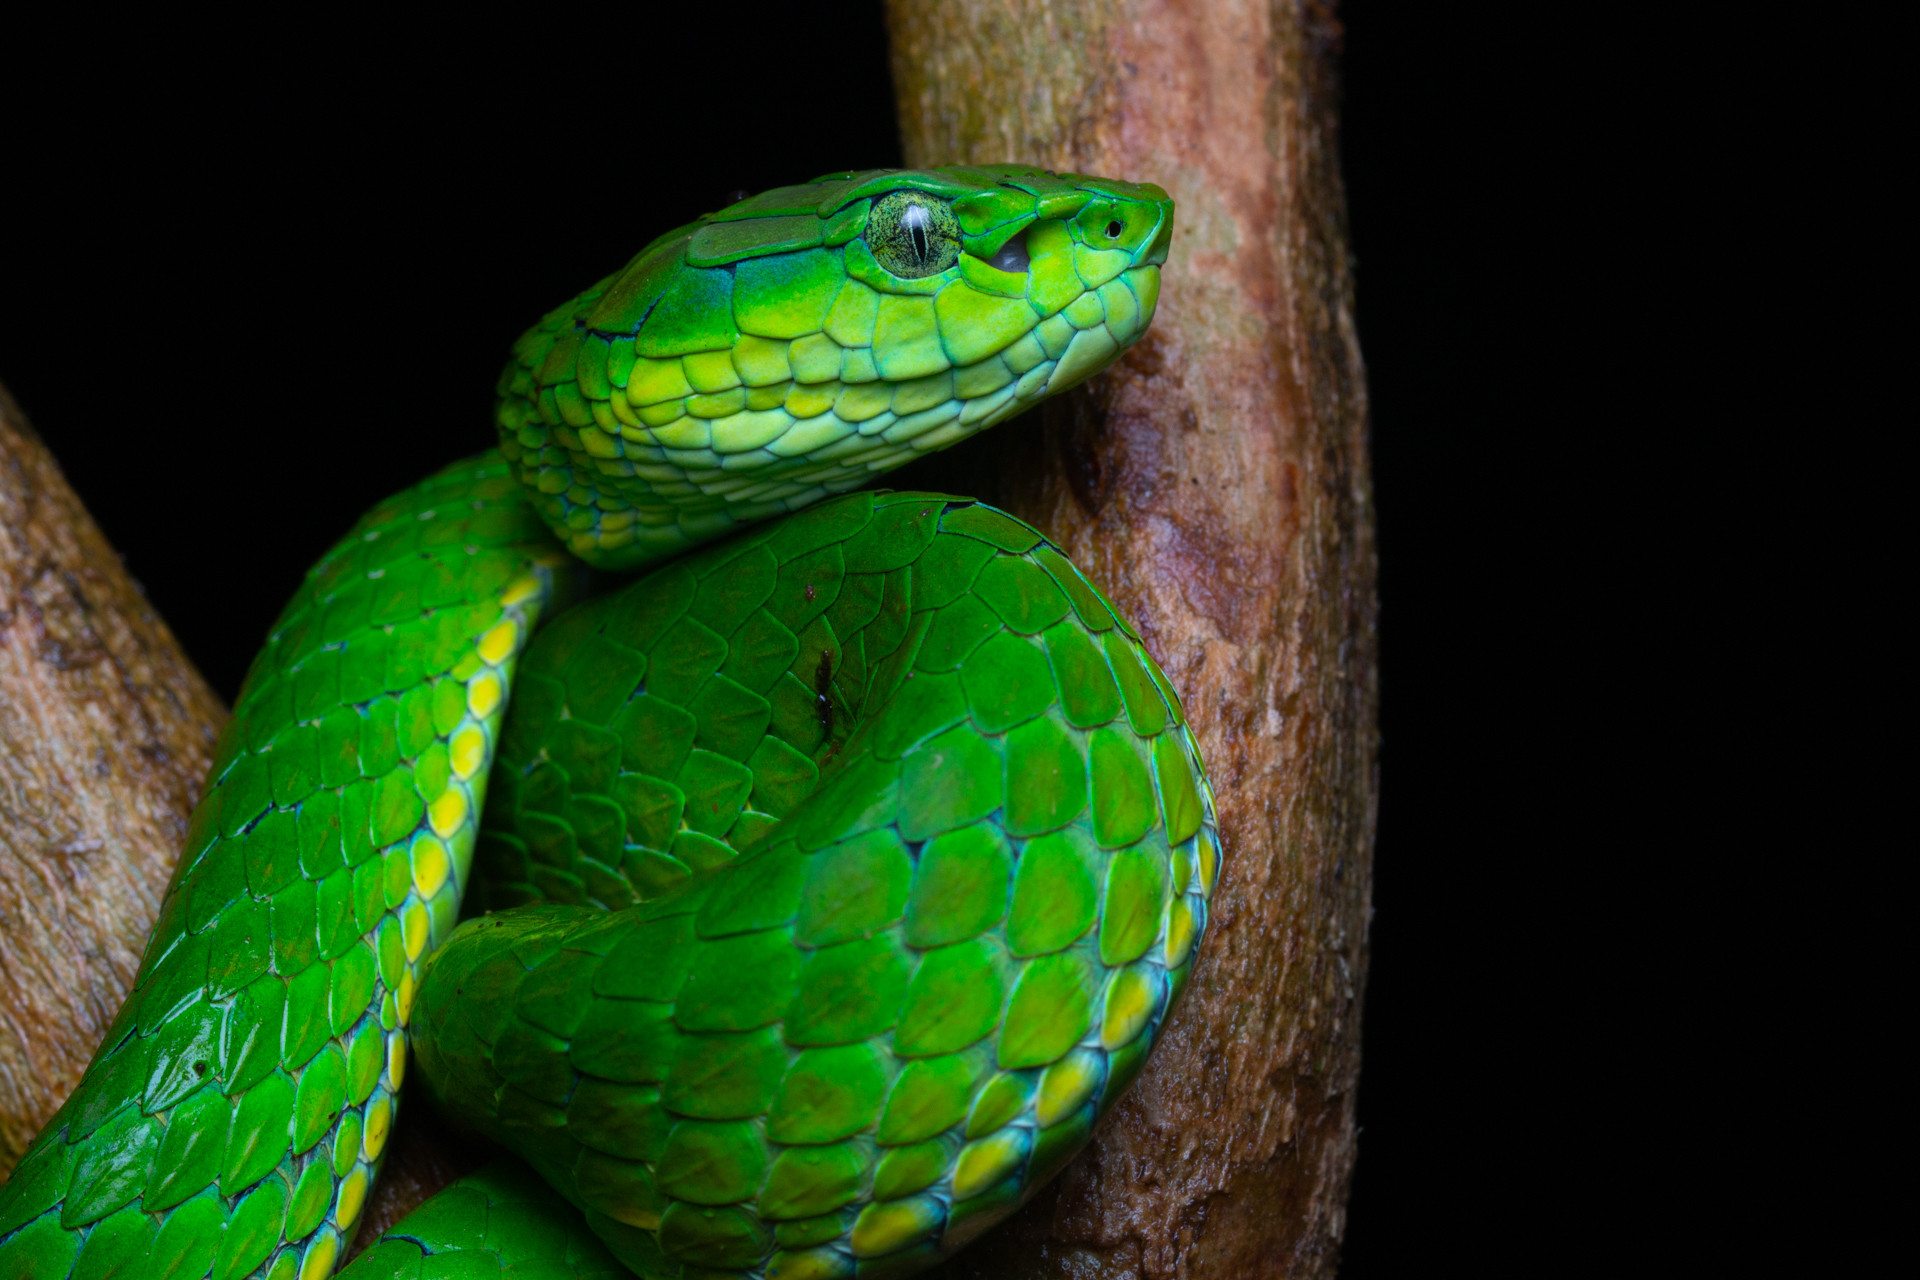 India's Striking Variety Of Pit Vipers